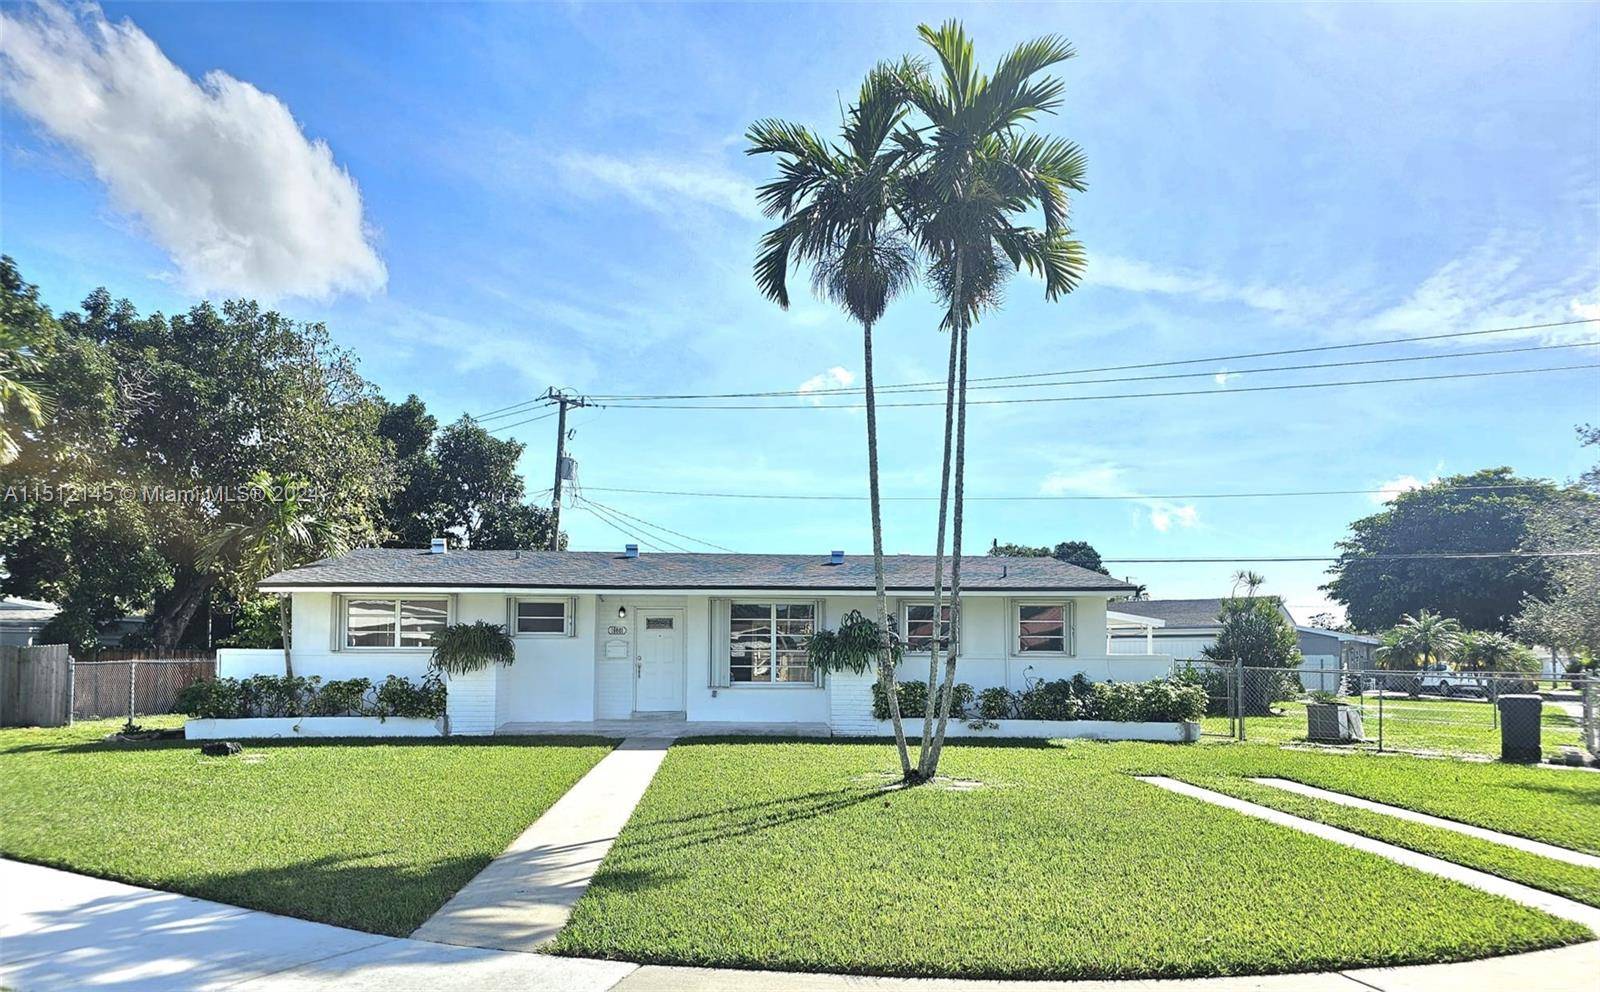 CORNER LOT ! Come and see this remodeled 4 bedroom, 2 bathroom home in Cutler Bay !